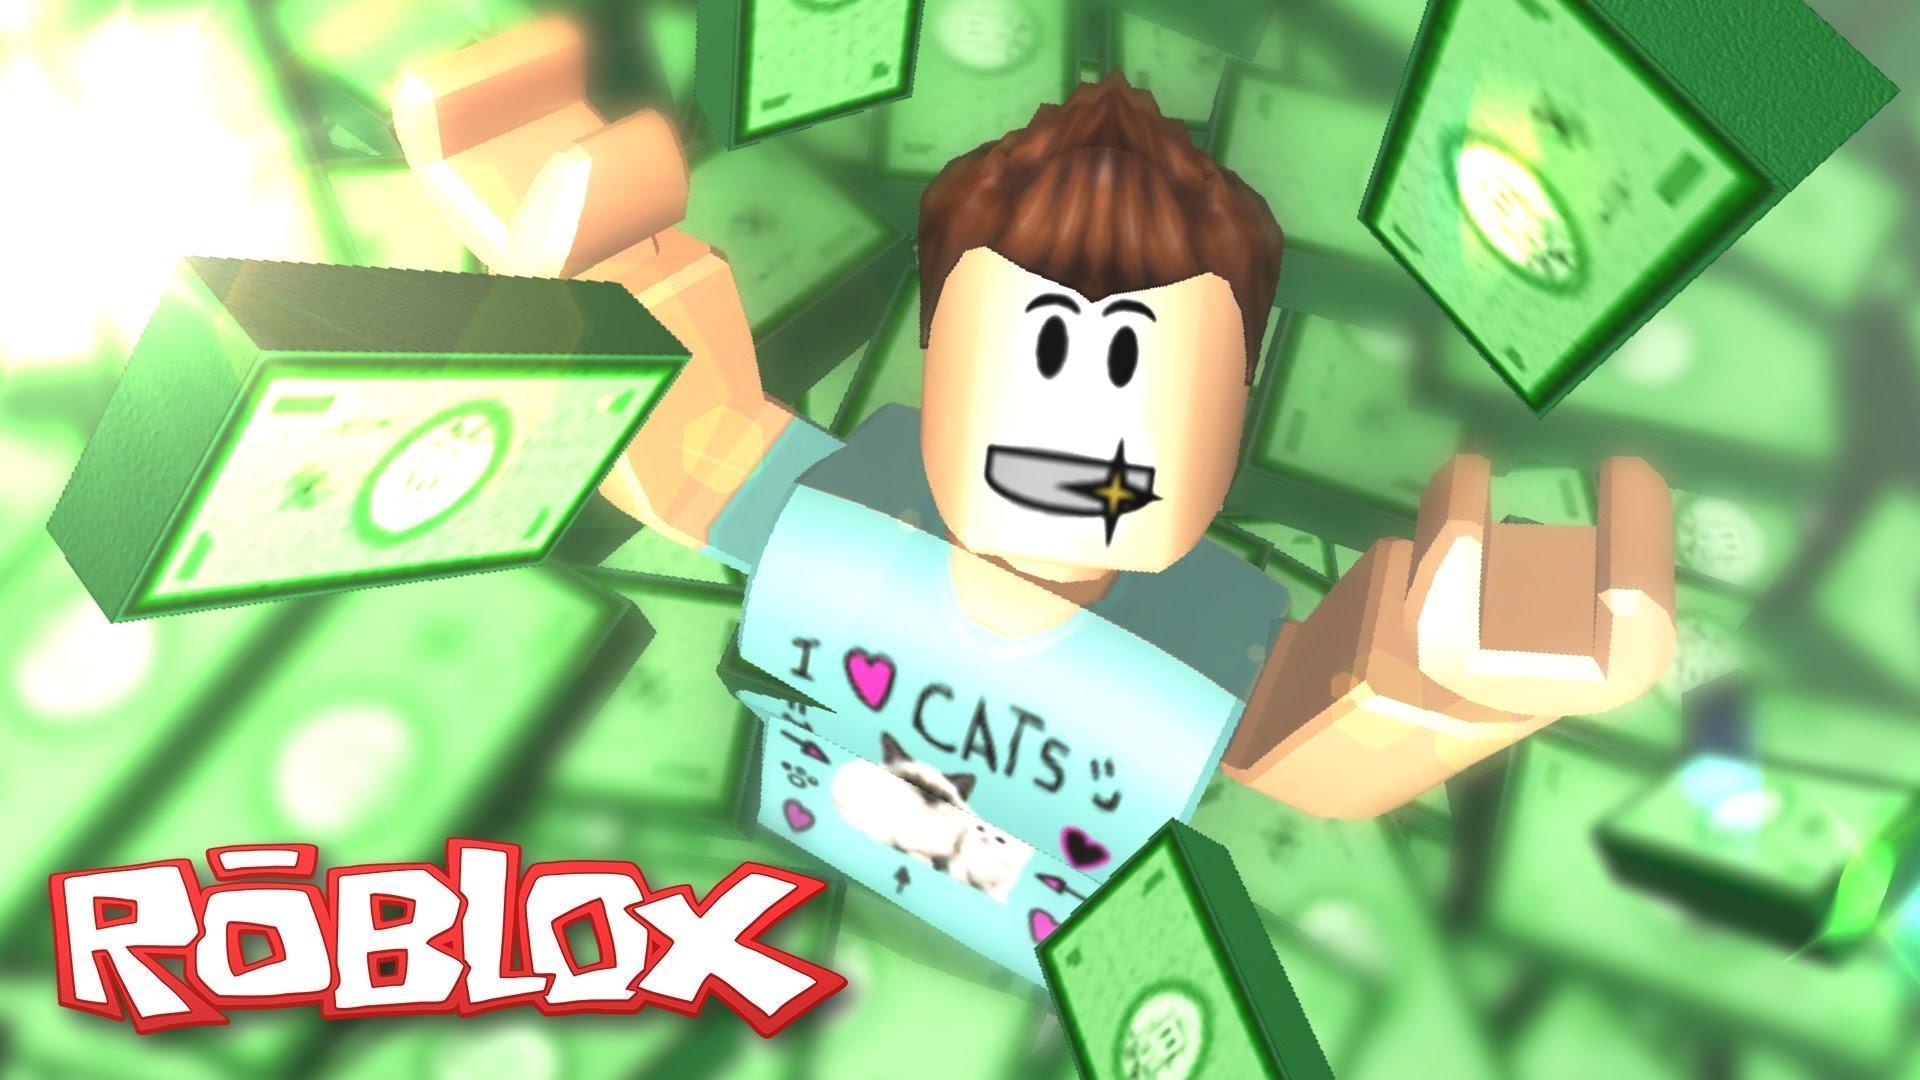 Roblox Logo Wallpapers Top Free Roblox Logo Backgrounds - new roblox wallpaper hd for android apk download